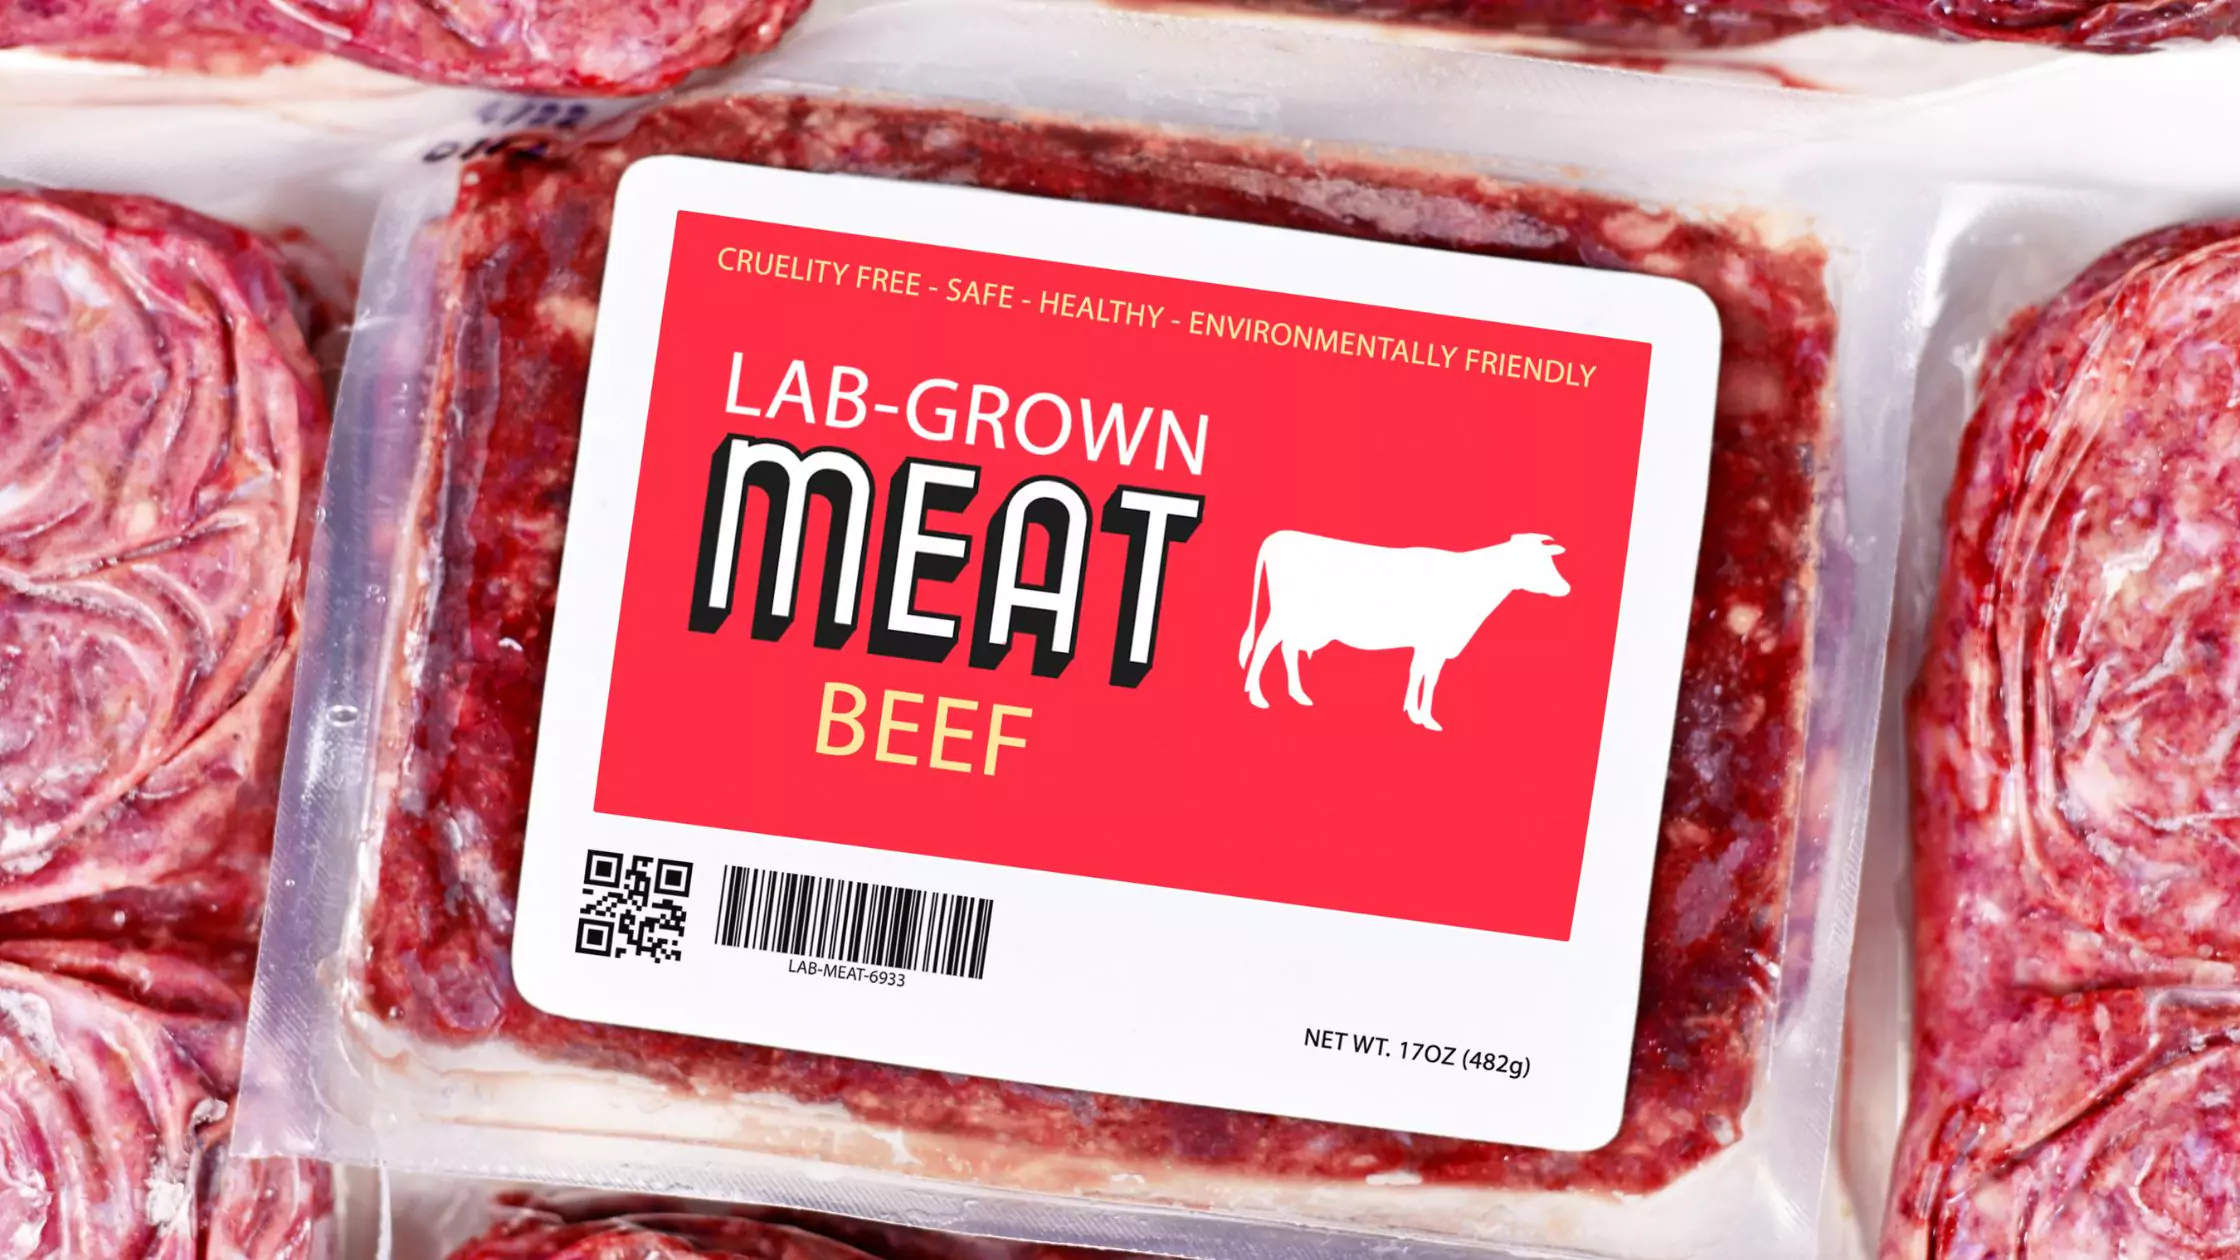 Lab-grown meat labeling.